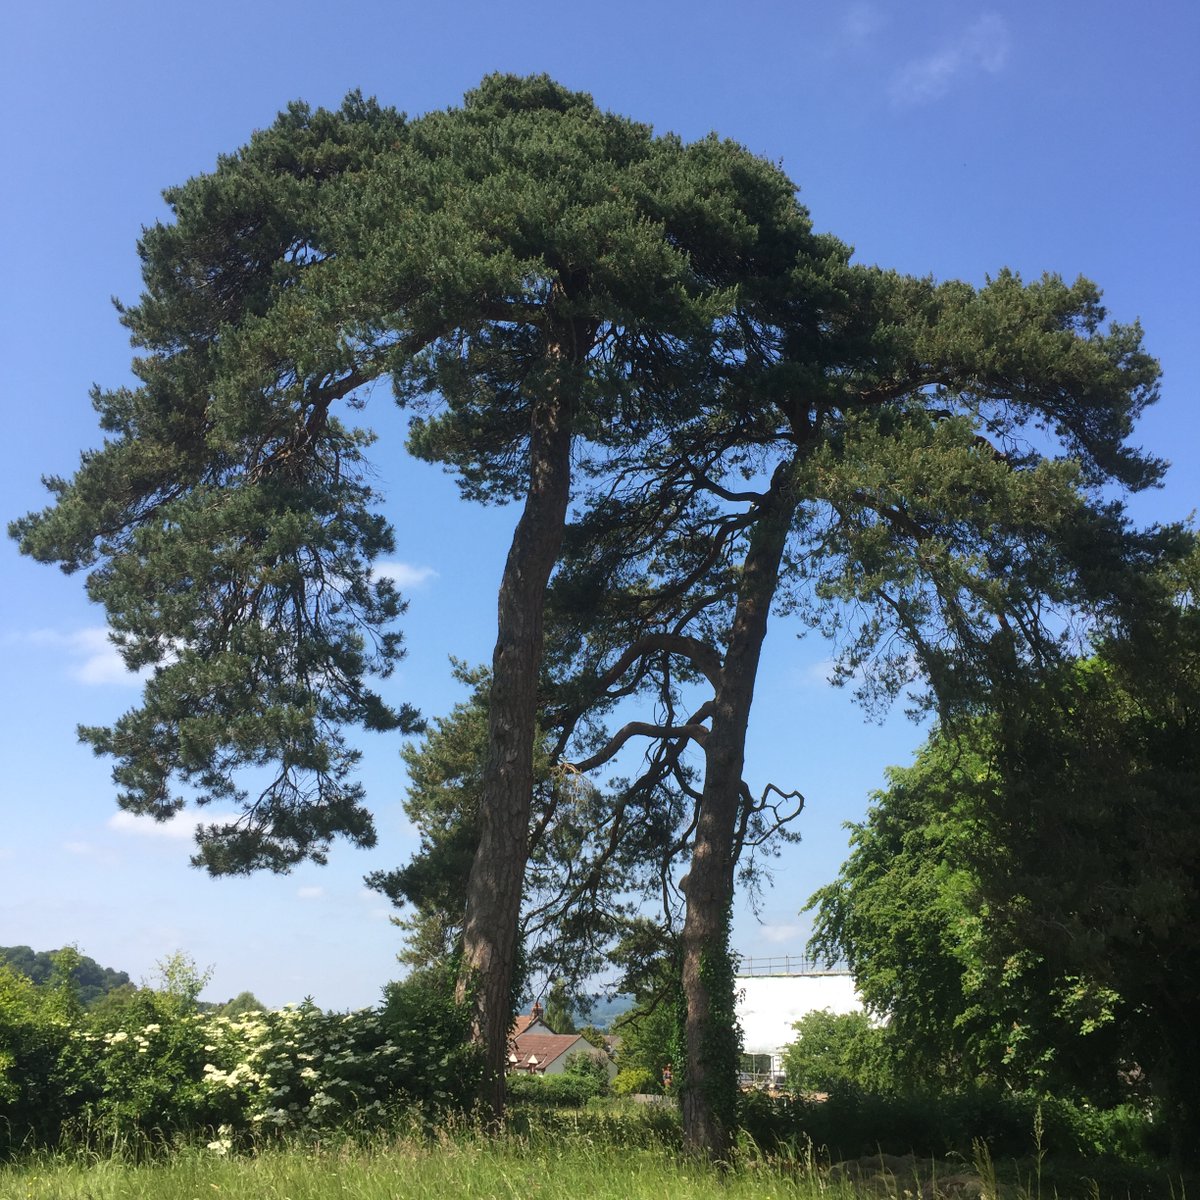 Day 7 and more trees- this time on the church boundary #30DaysWild #LoveYourBurialGroundWeek